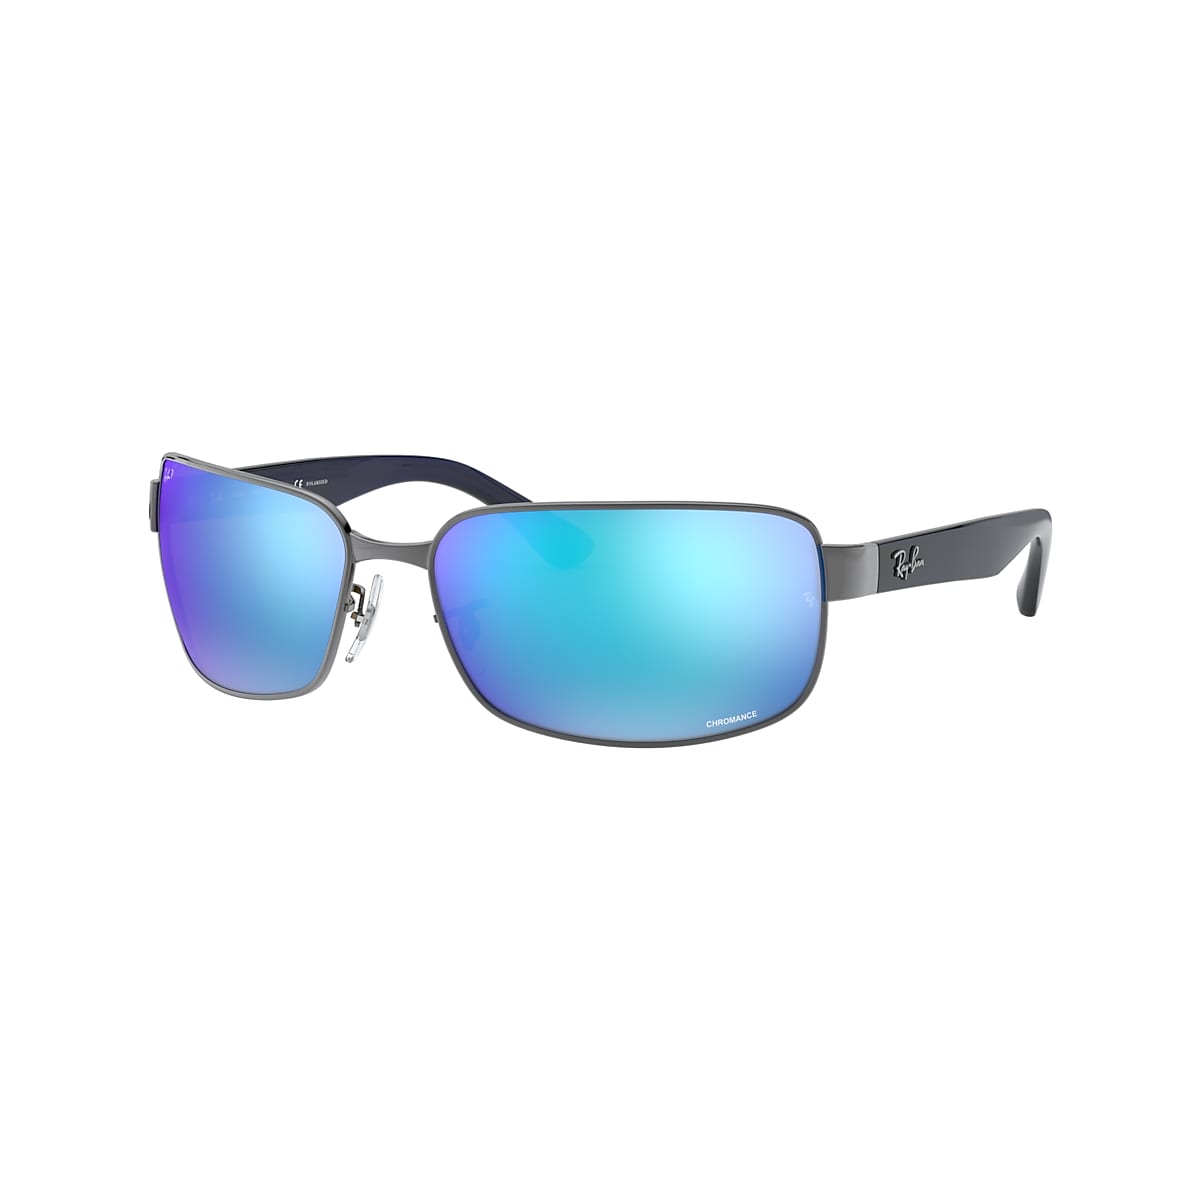 Ray-Ban 0RB3566CH Sunglasses in Silver/gunmetal/grey | Target Optical